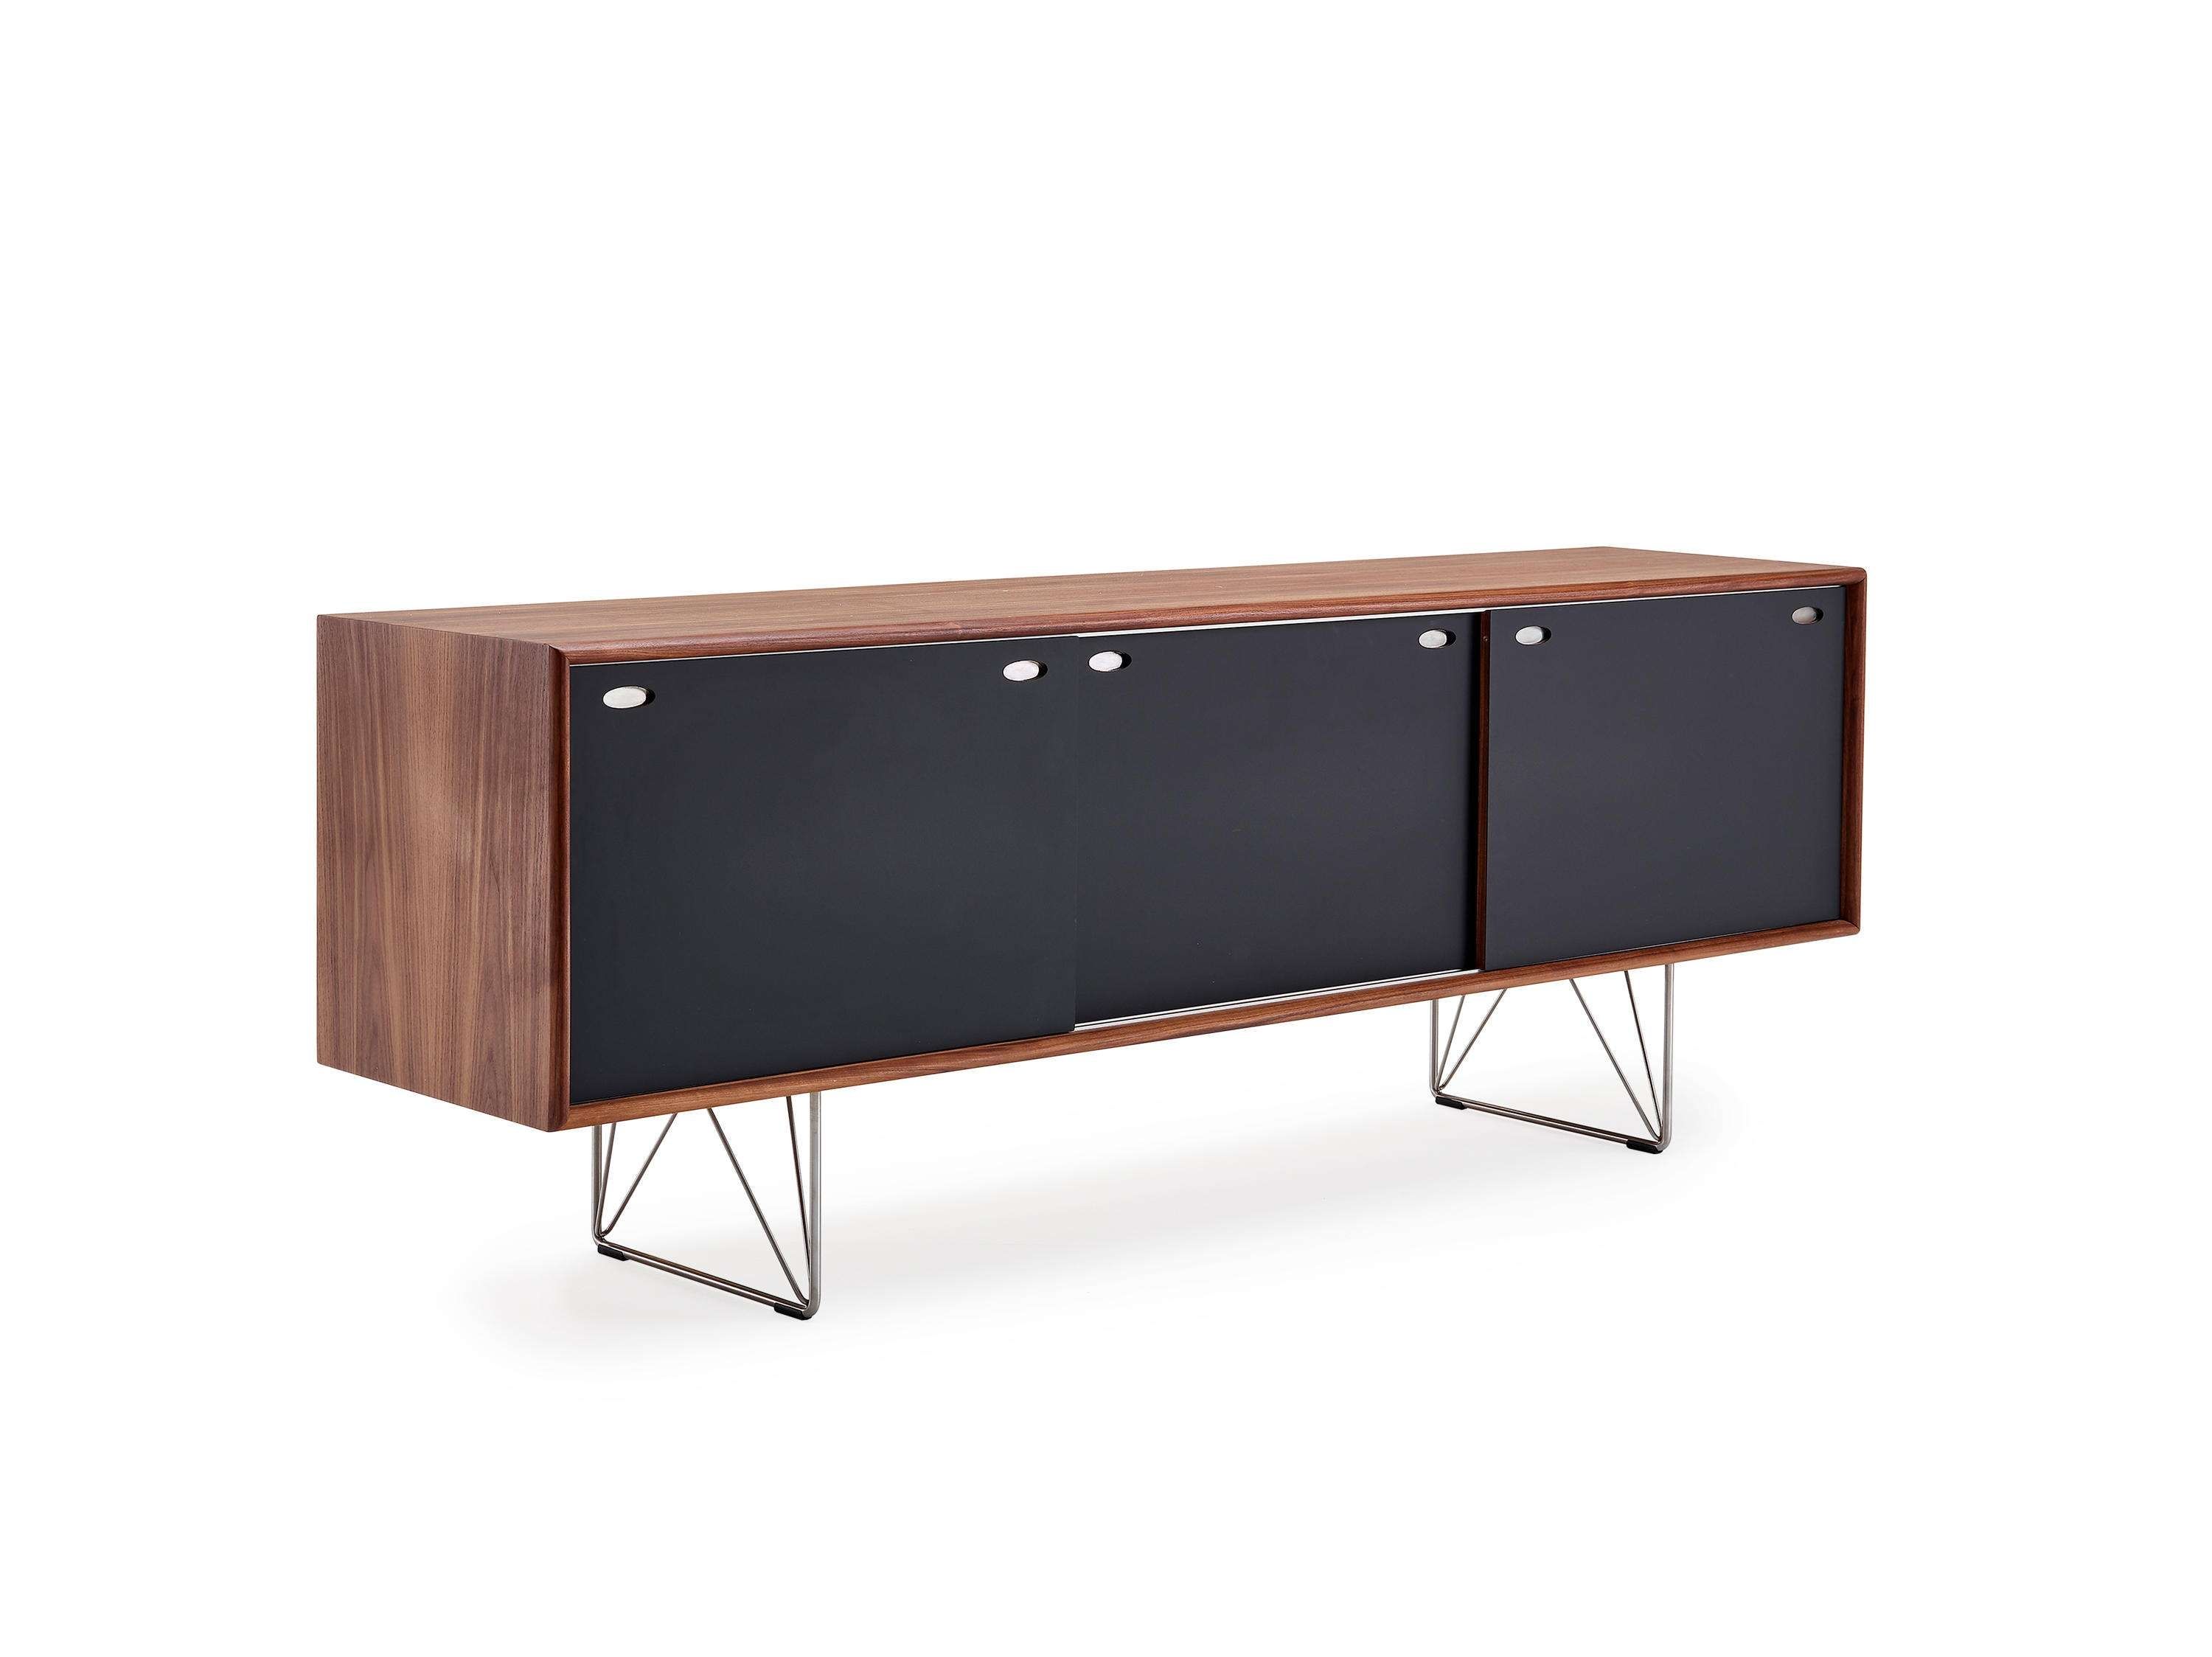 Ak 2861 Sideboard – Sideboards From Naver Collection | Architonic Pertaining To Magic The Gathering Sideboards (View 10 of 24)